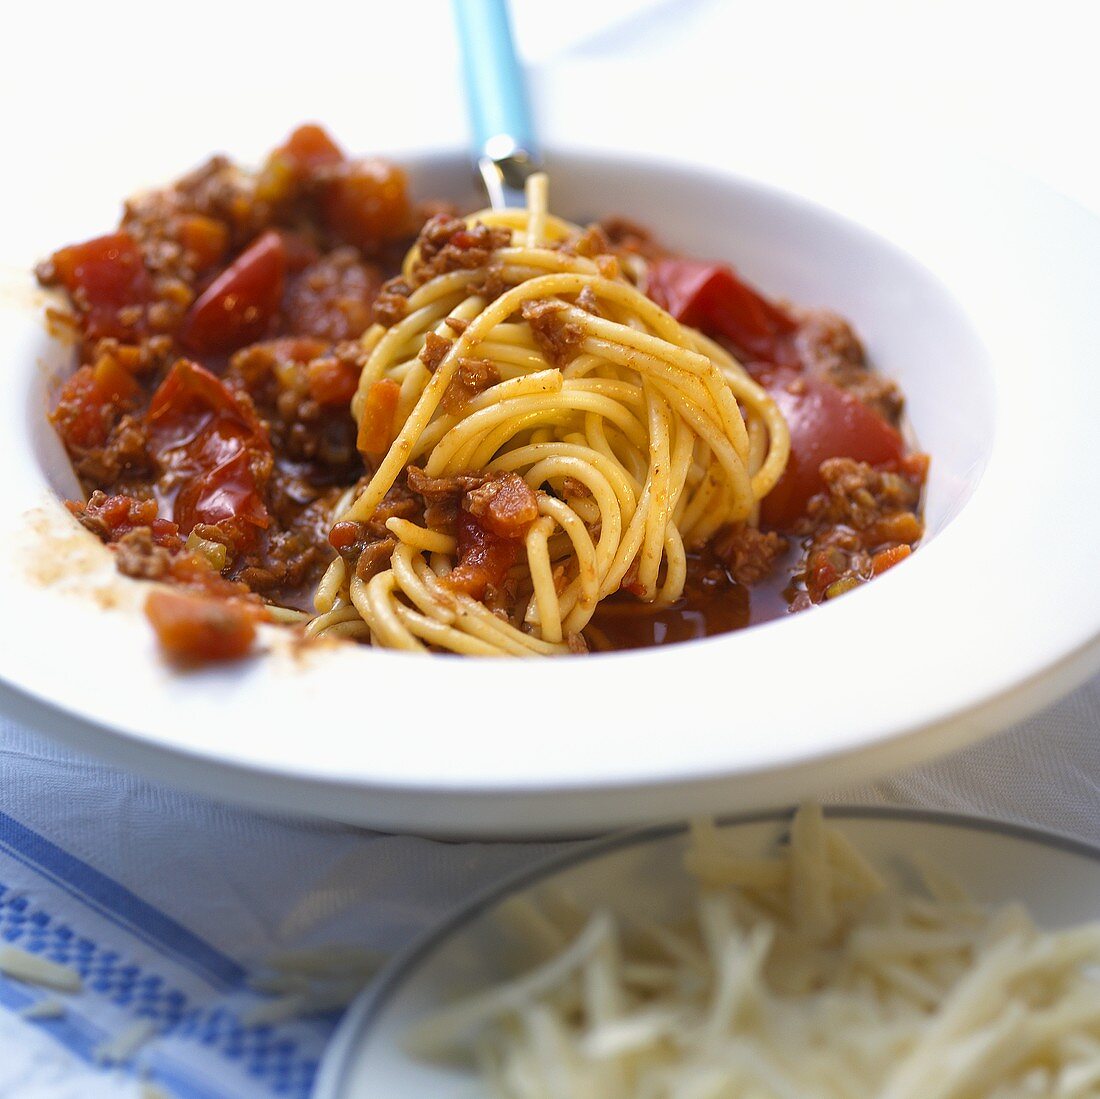 Spaghetti with bolognese style tomato and vegetable sauce